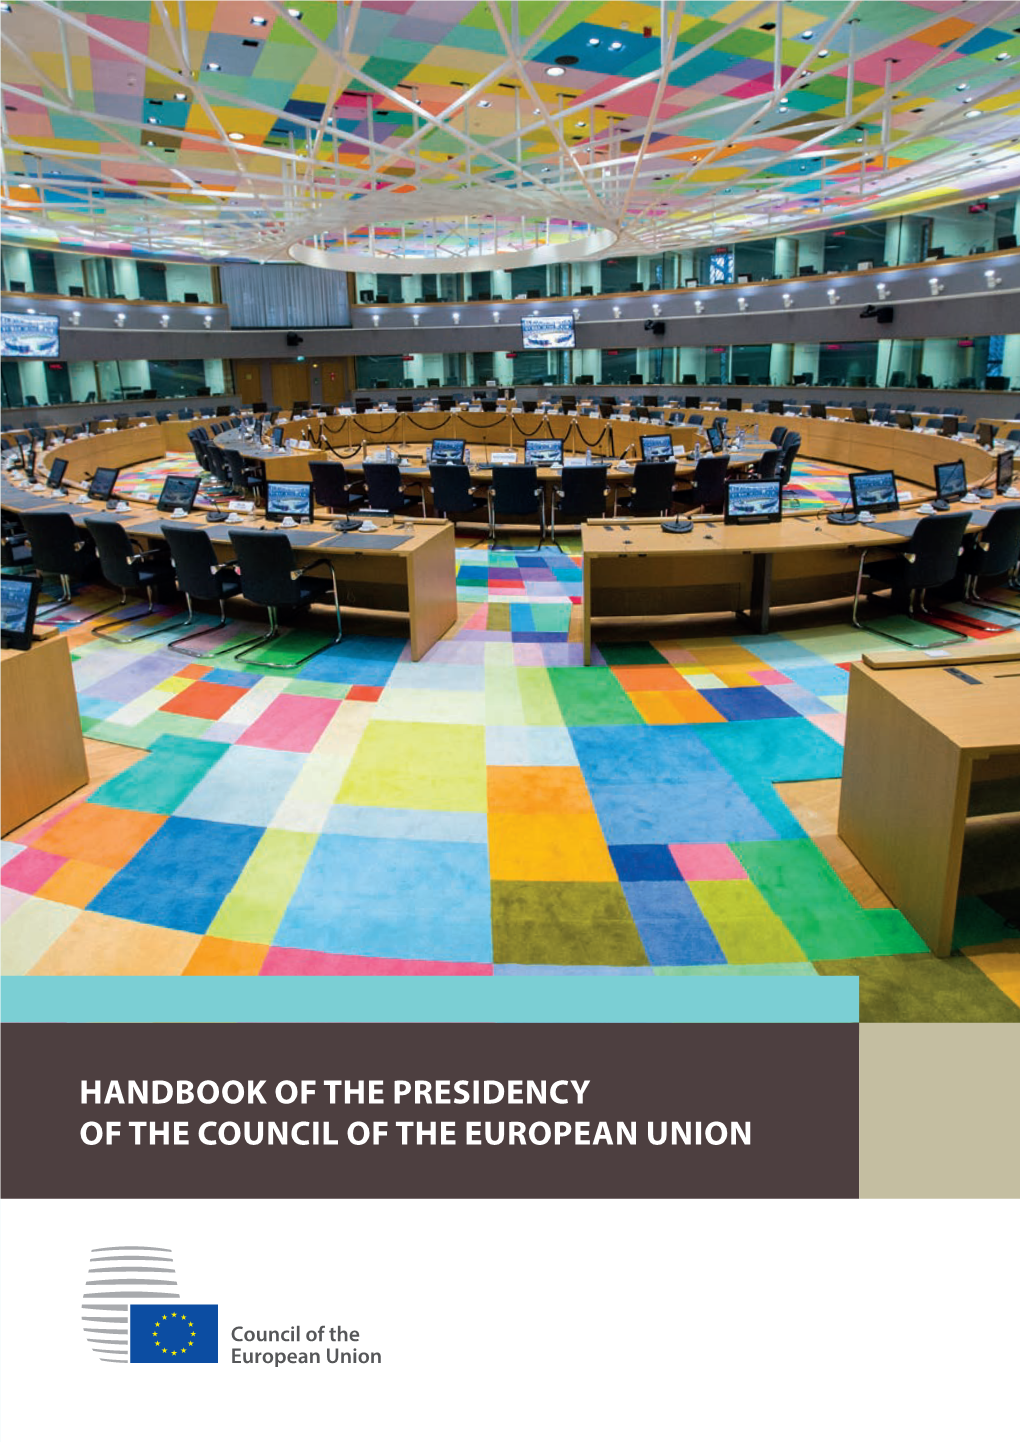 Handbook of the Presidency of the Council of the European Union